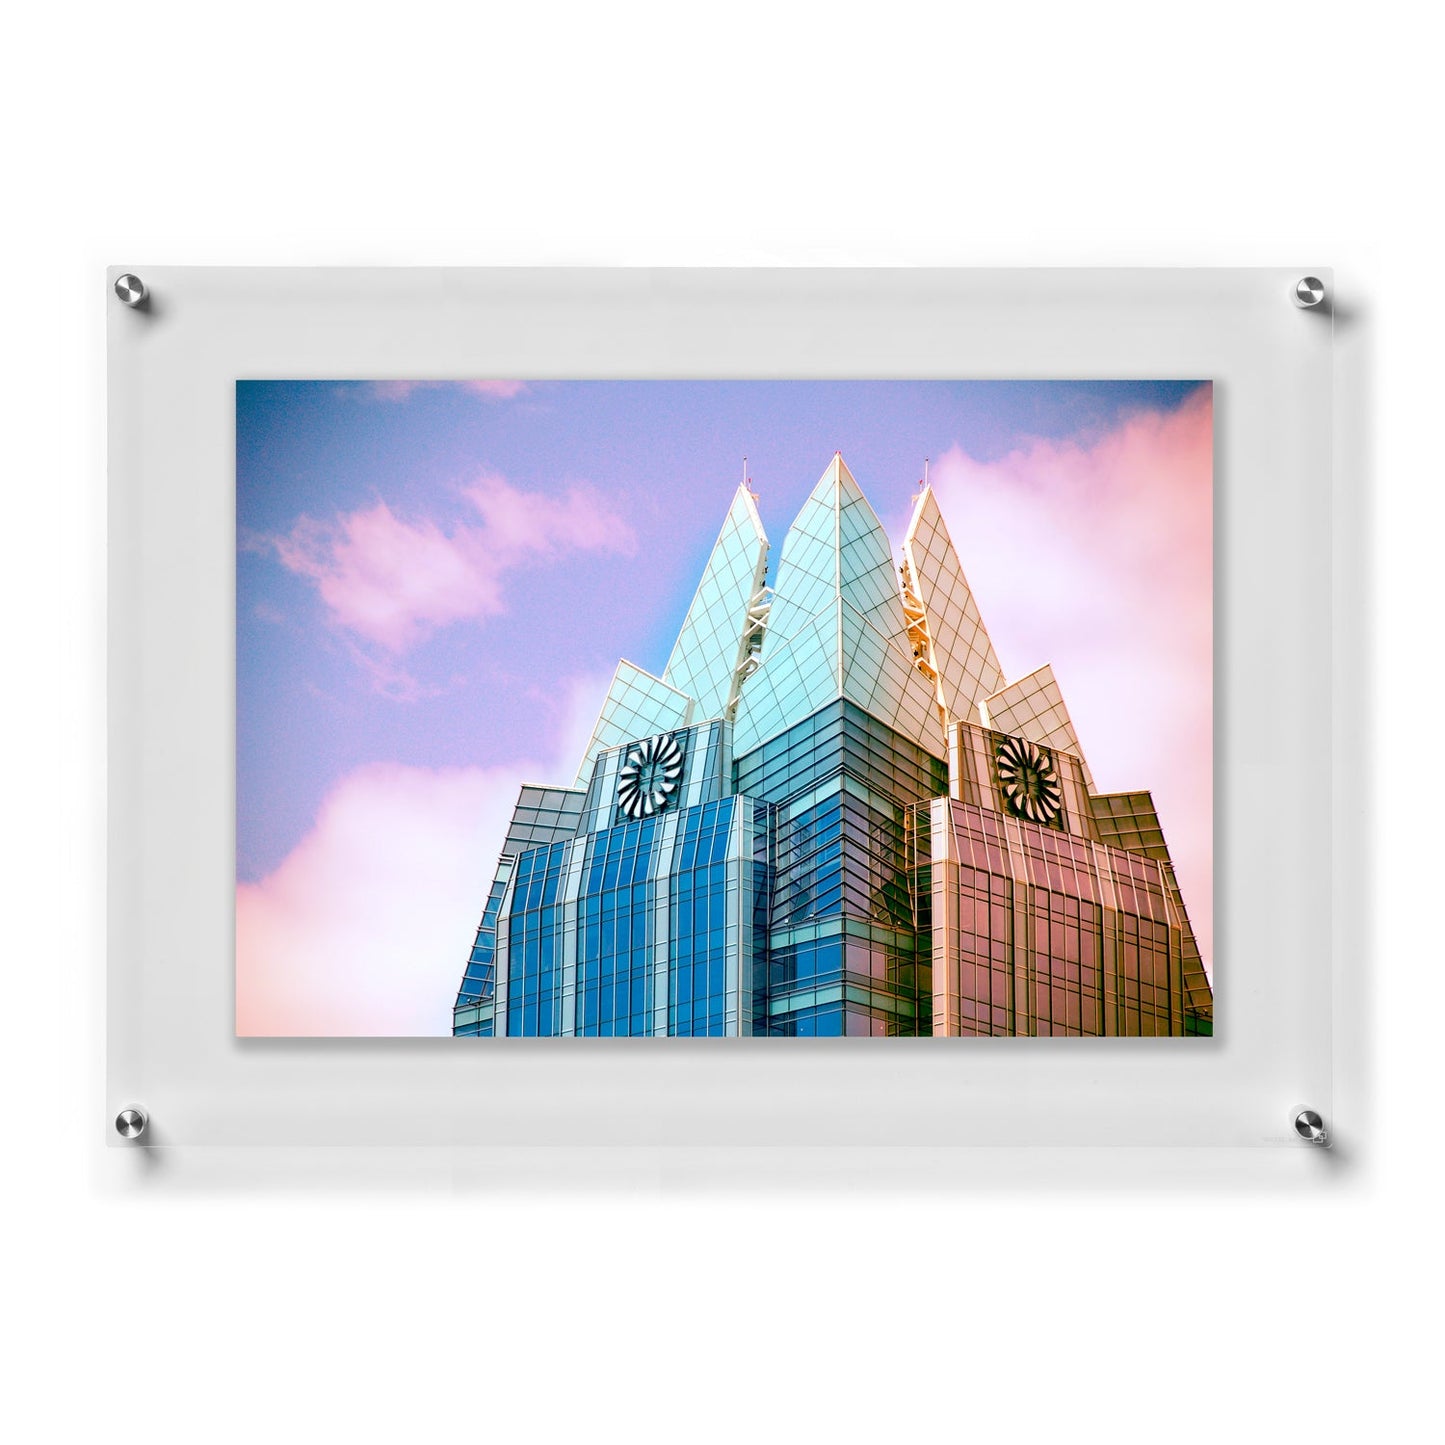 WS Double: 23" x 33" Double Panel Frame